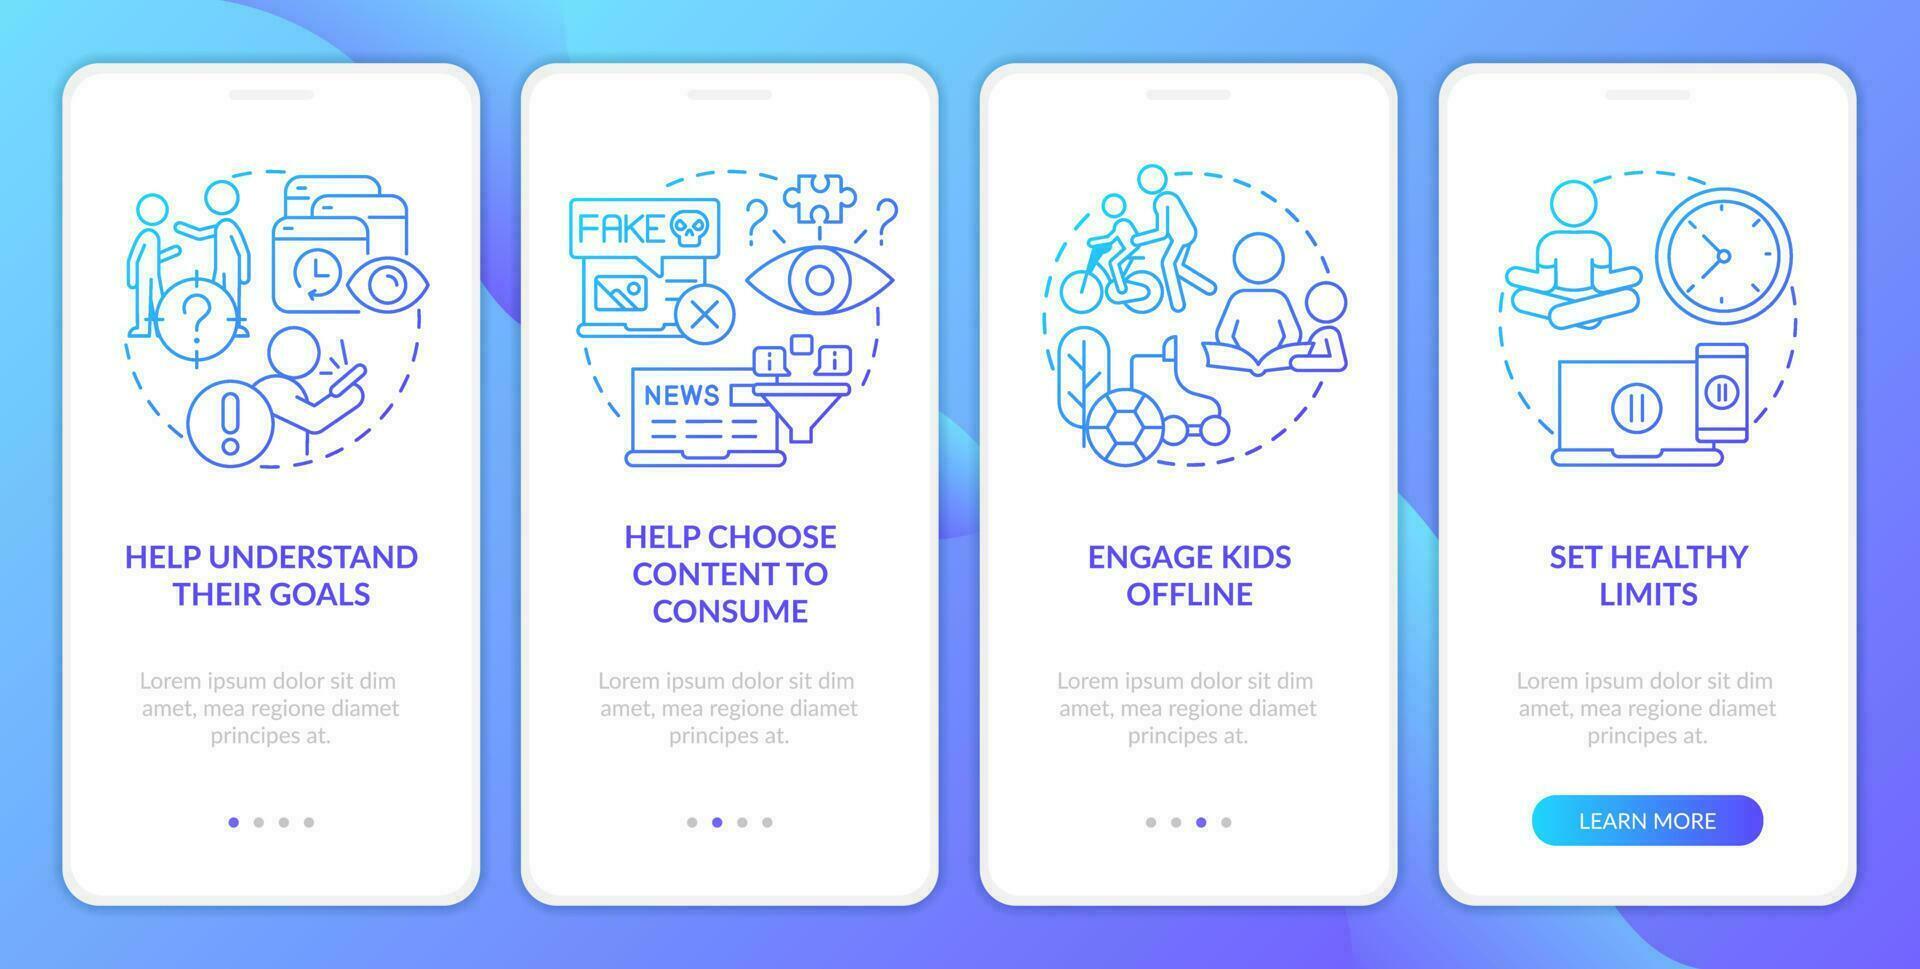 Teen device addiction tips blue gradient onboarding mobile app screen. Walkthrough 4 steps graphic instructions with linear concepts. UI, UX, GUI template vector